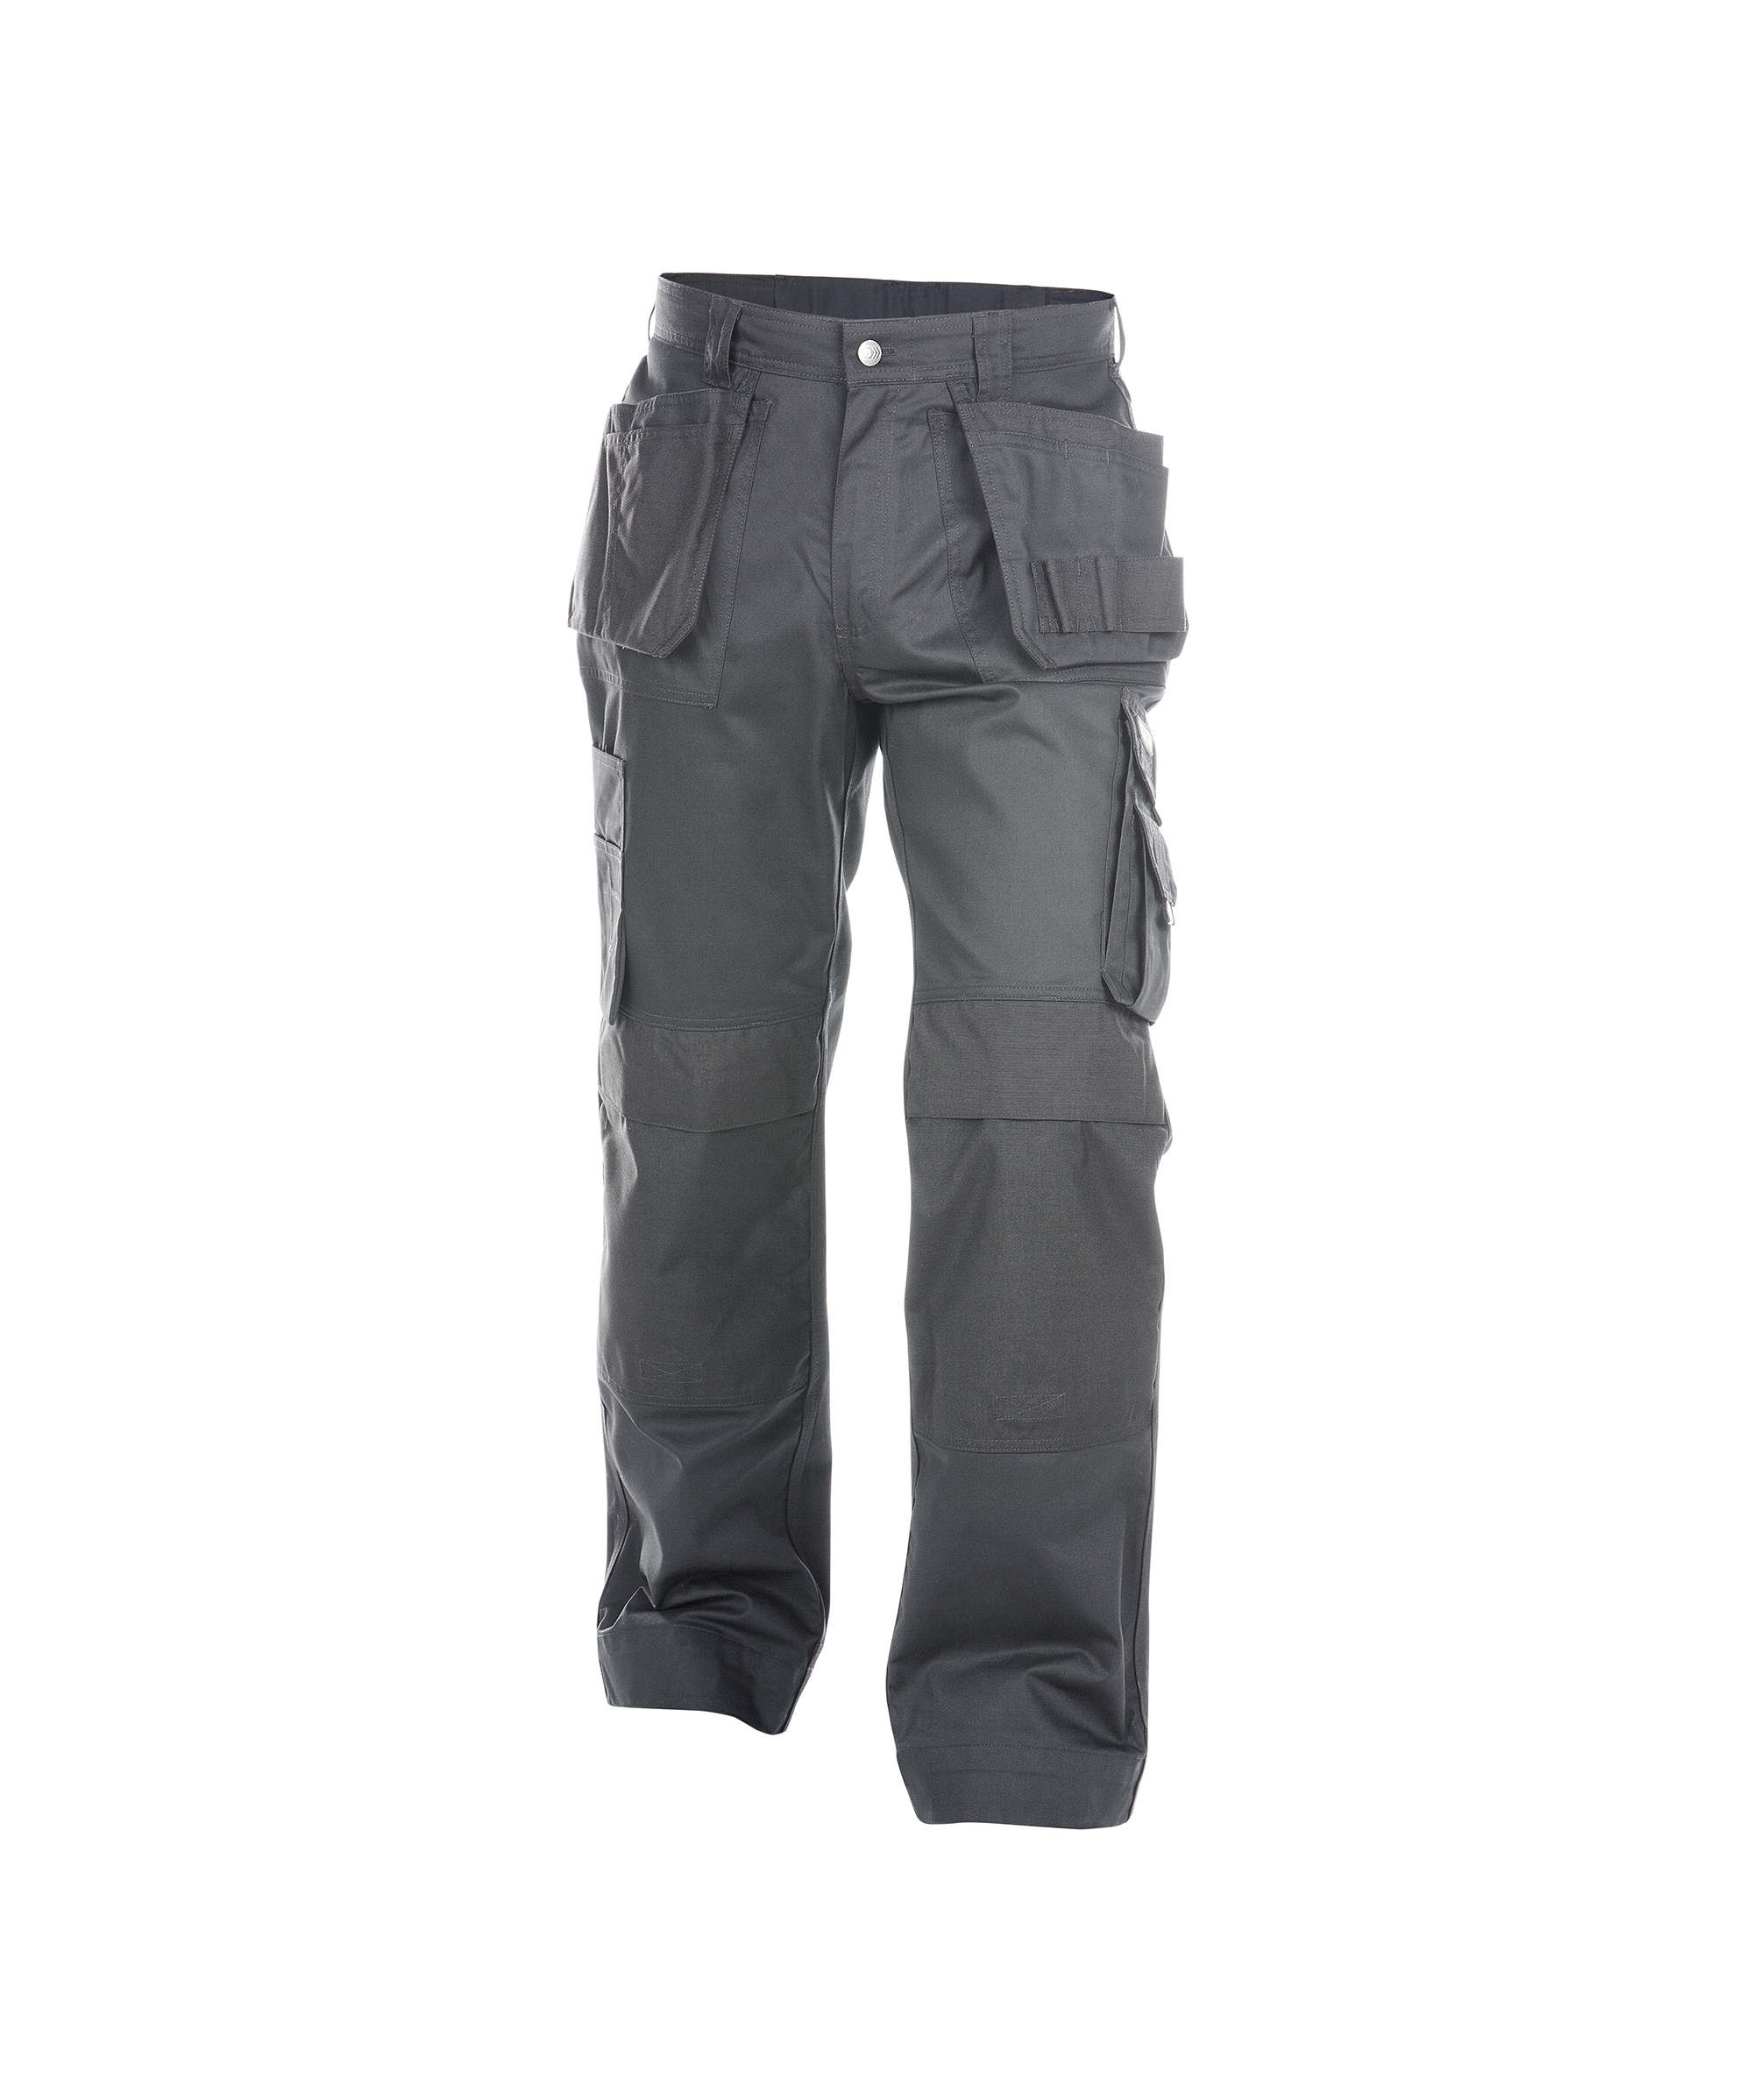 oxford_work-trousers-with-multi-pockets-and-knee-pockets_cement-grey_front.jpg